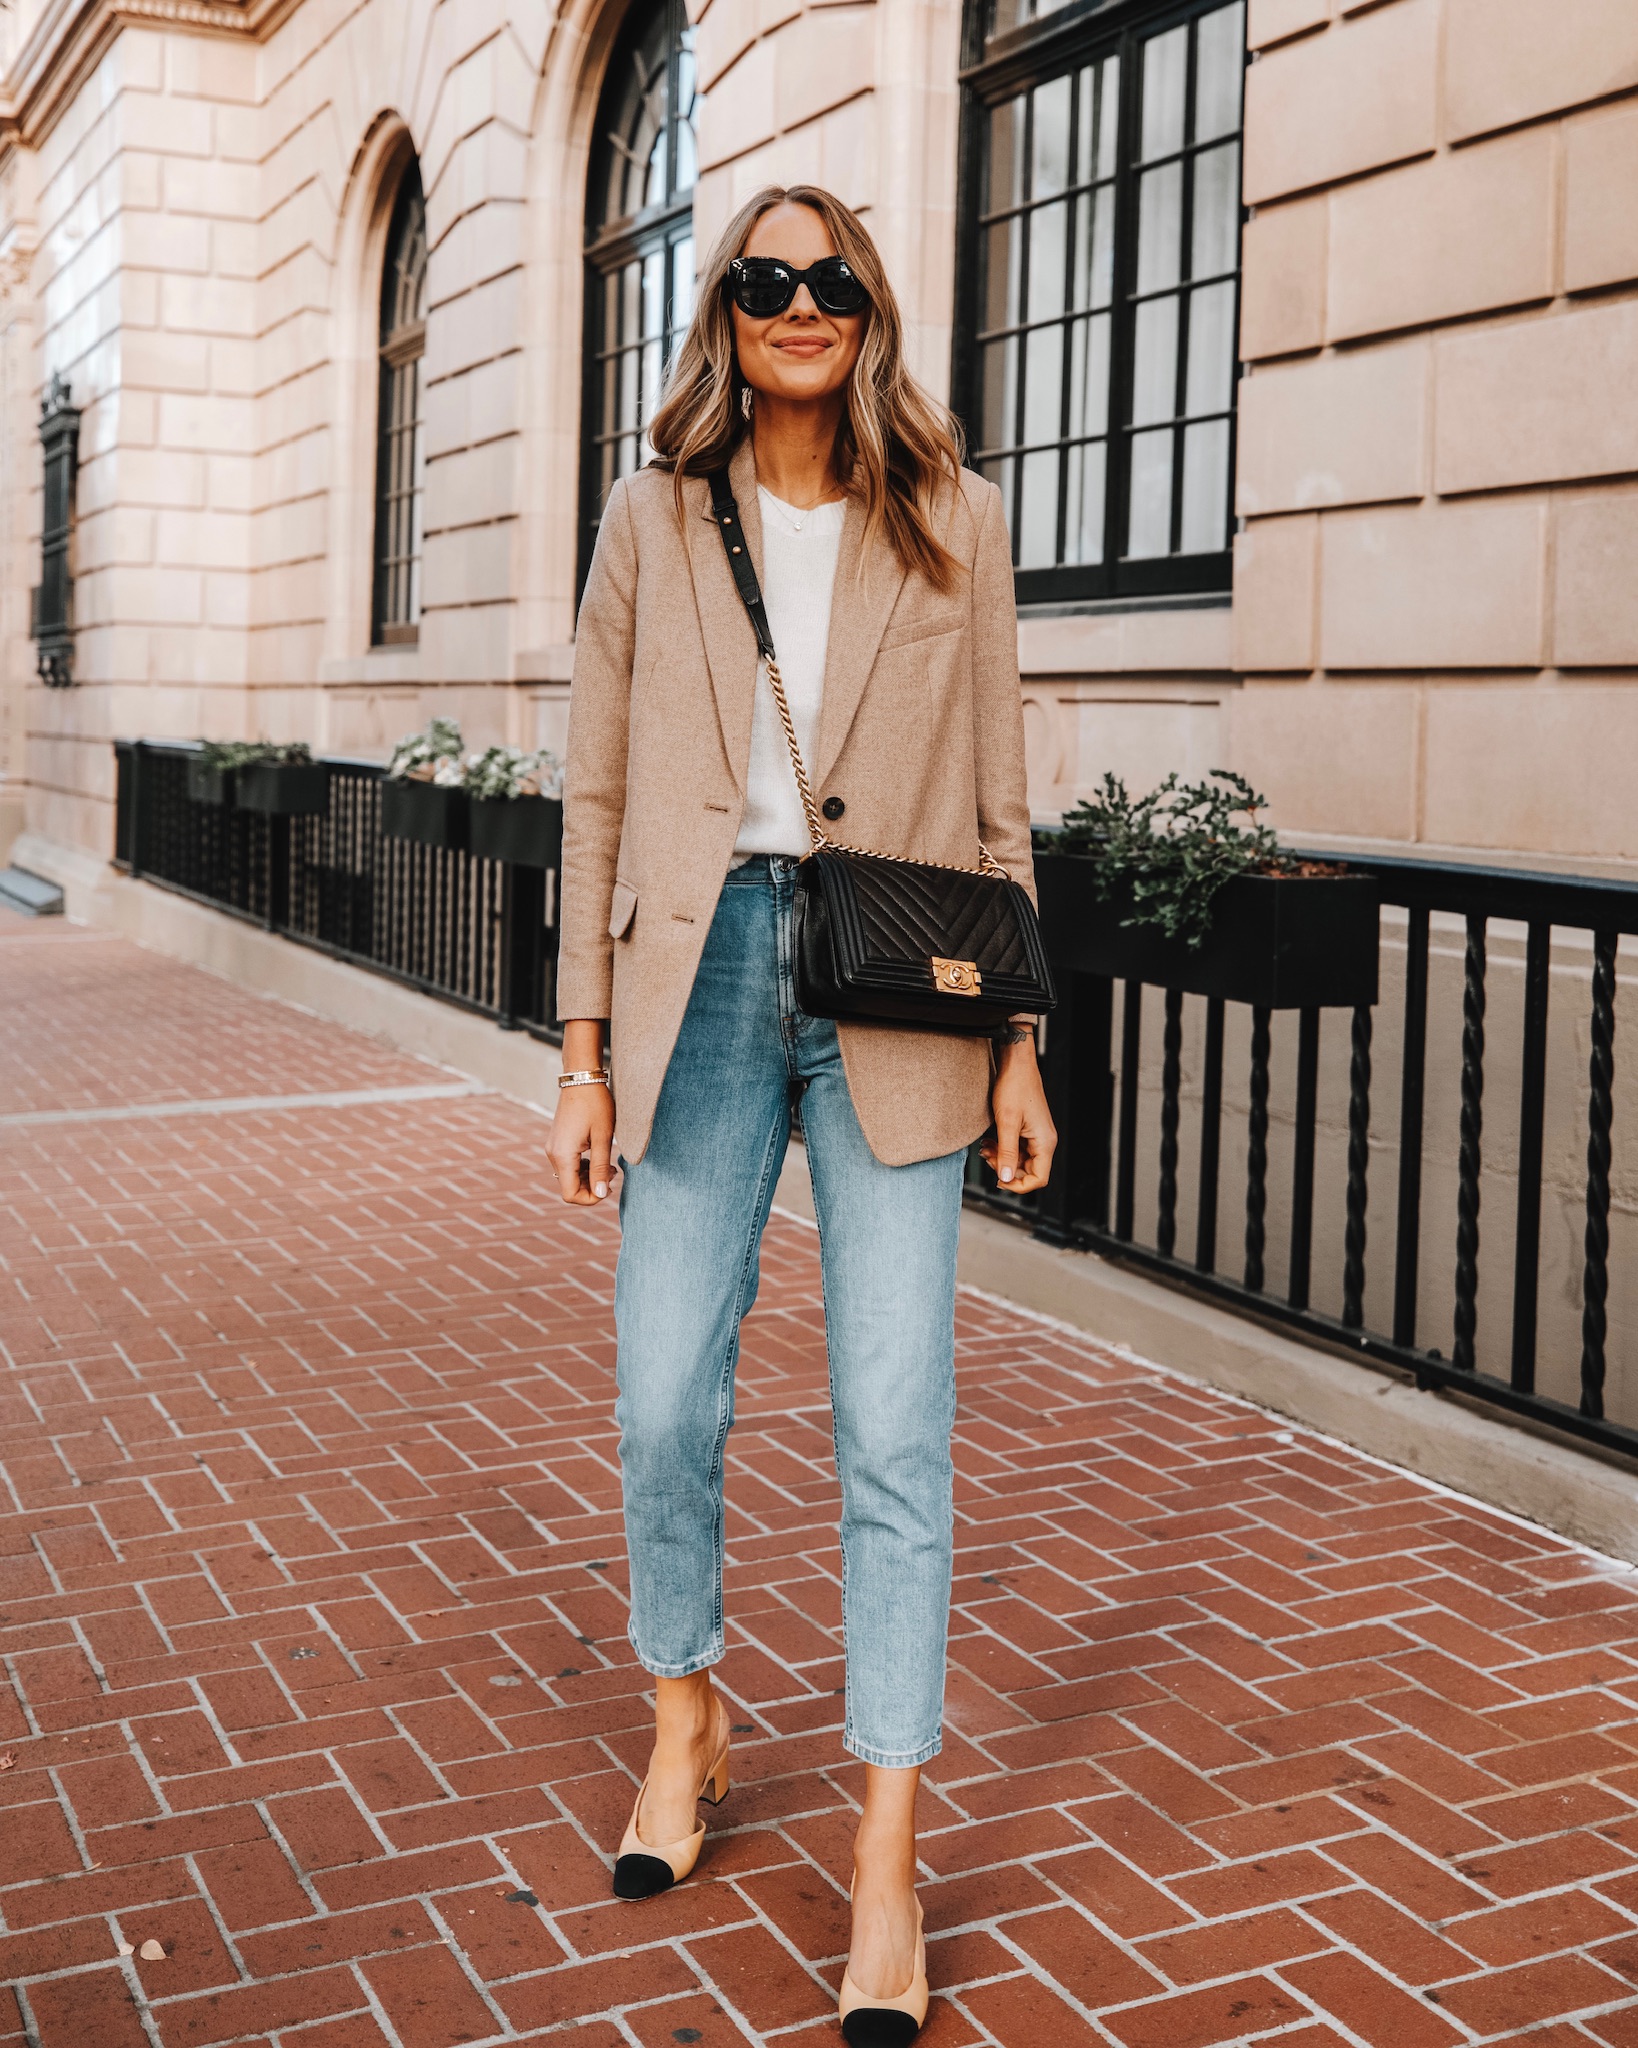 Fashion Jackson Wearing Everlane Oversized Blazer Beige Twill White Sweater Casual Jeans Chanel Slingbacks Chanel Boy Bag Business Casual Outfit 2